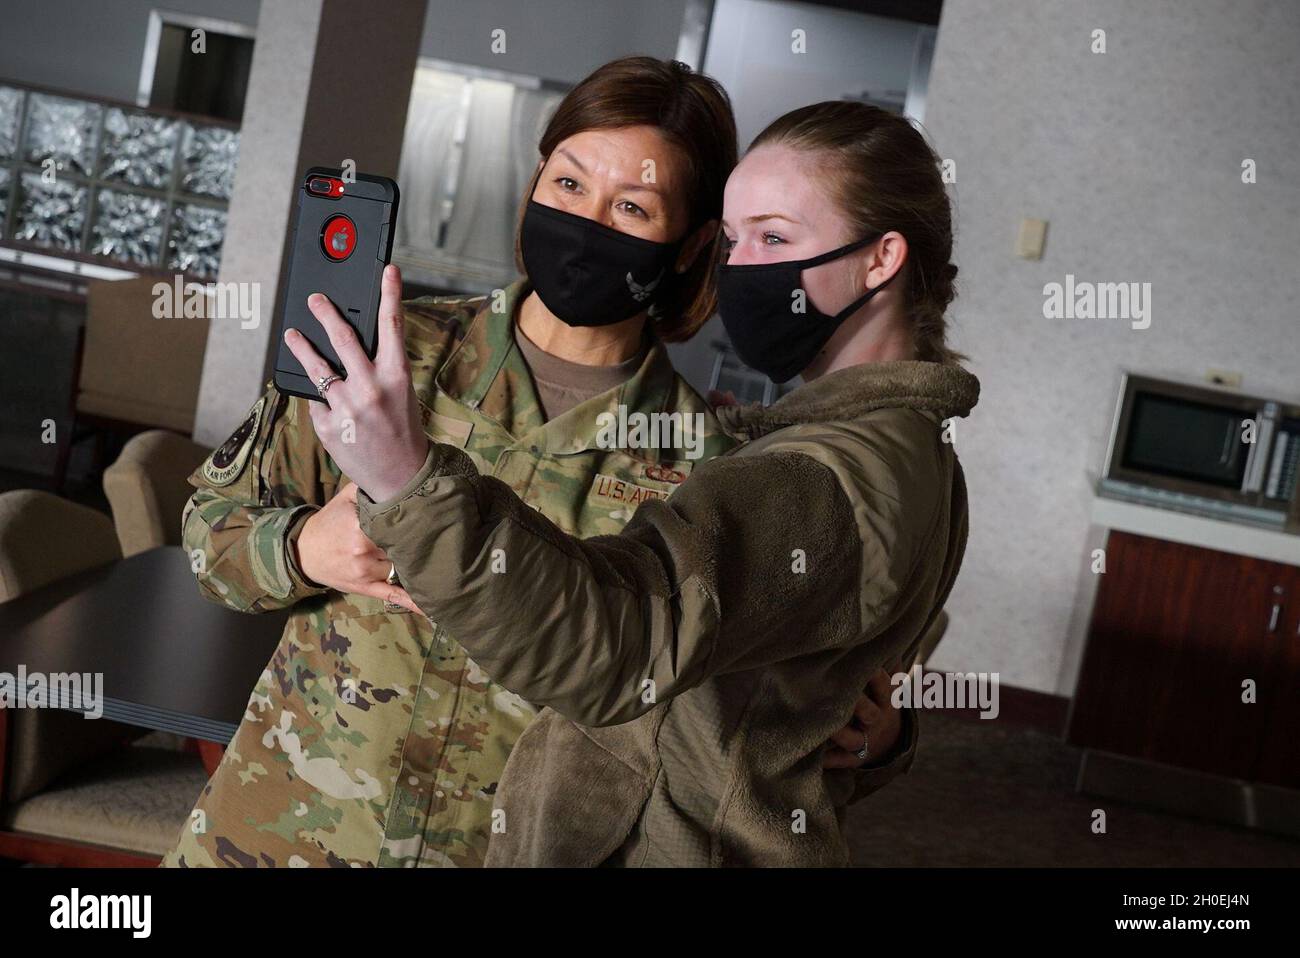 Chief Master Sgt. of the Air Force JoAnne S. Bass, left, takes a selfie with Airman 1st Class Dakota LeGrand following a breakfast panel at Grand Forks Air Force Base, N.D., Feb. 12, 2021. LeGrand was encouraged by Bass to innovate her workplace in order to build up a team who strives to be a part of something bigger than themselves. Stock Photo